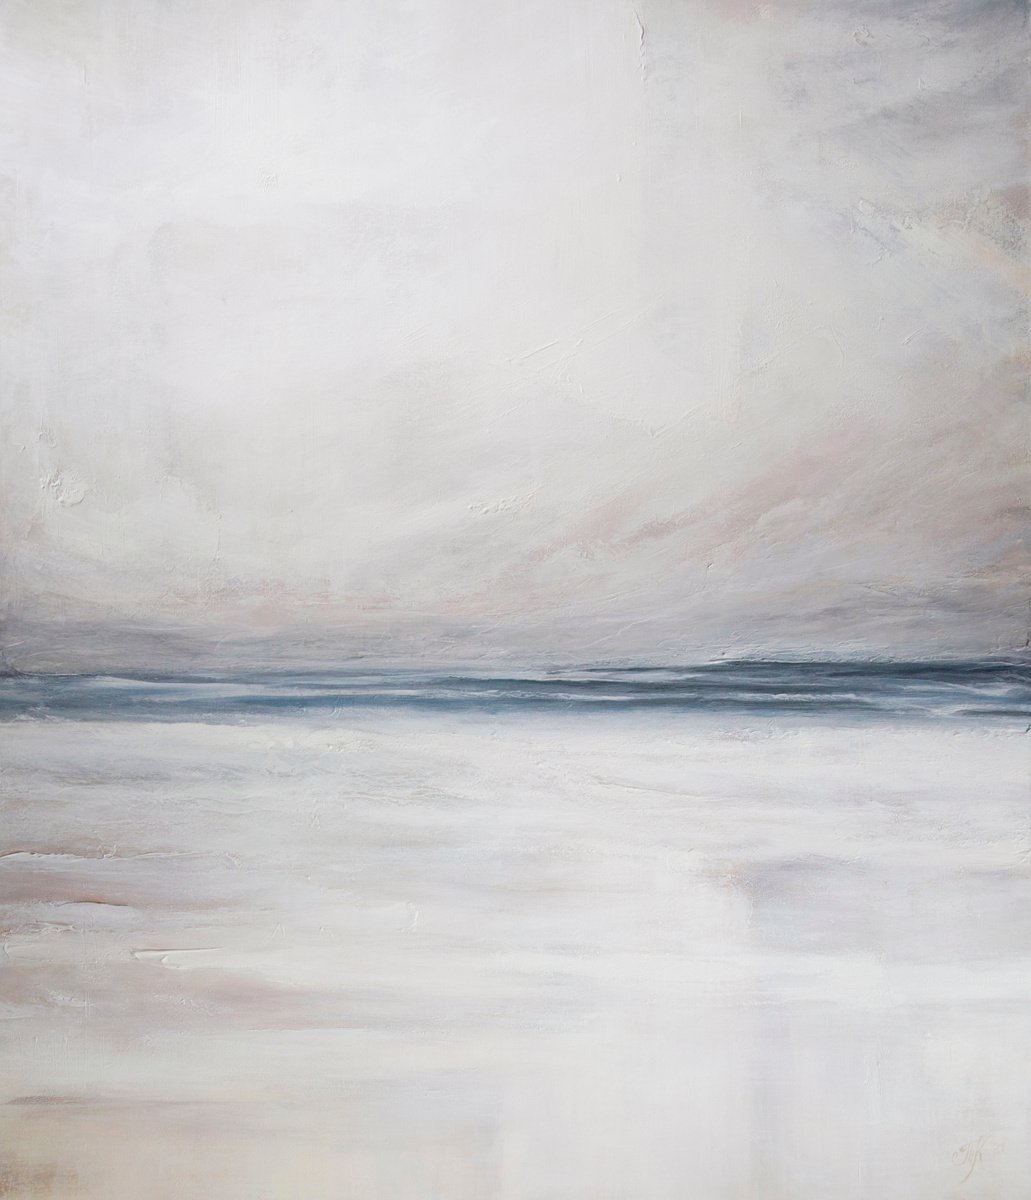 Quiet sound, 120*100cm, abstract seascape acrylic painting, large vertical painting by Tatyana Kirikova